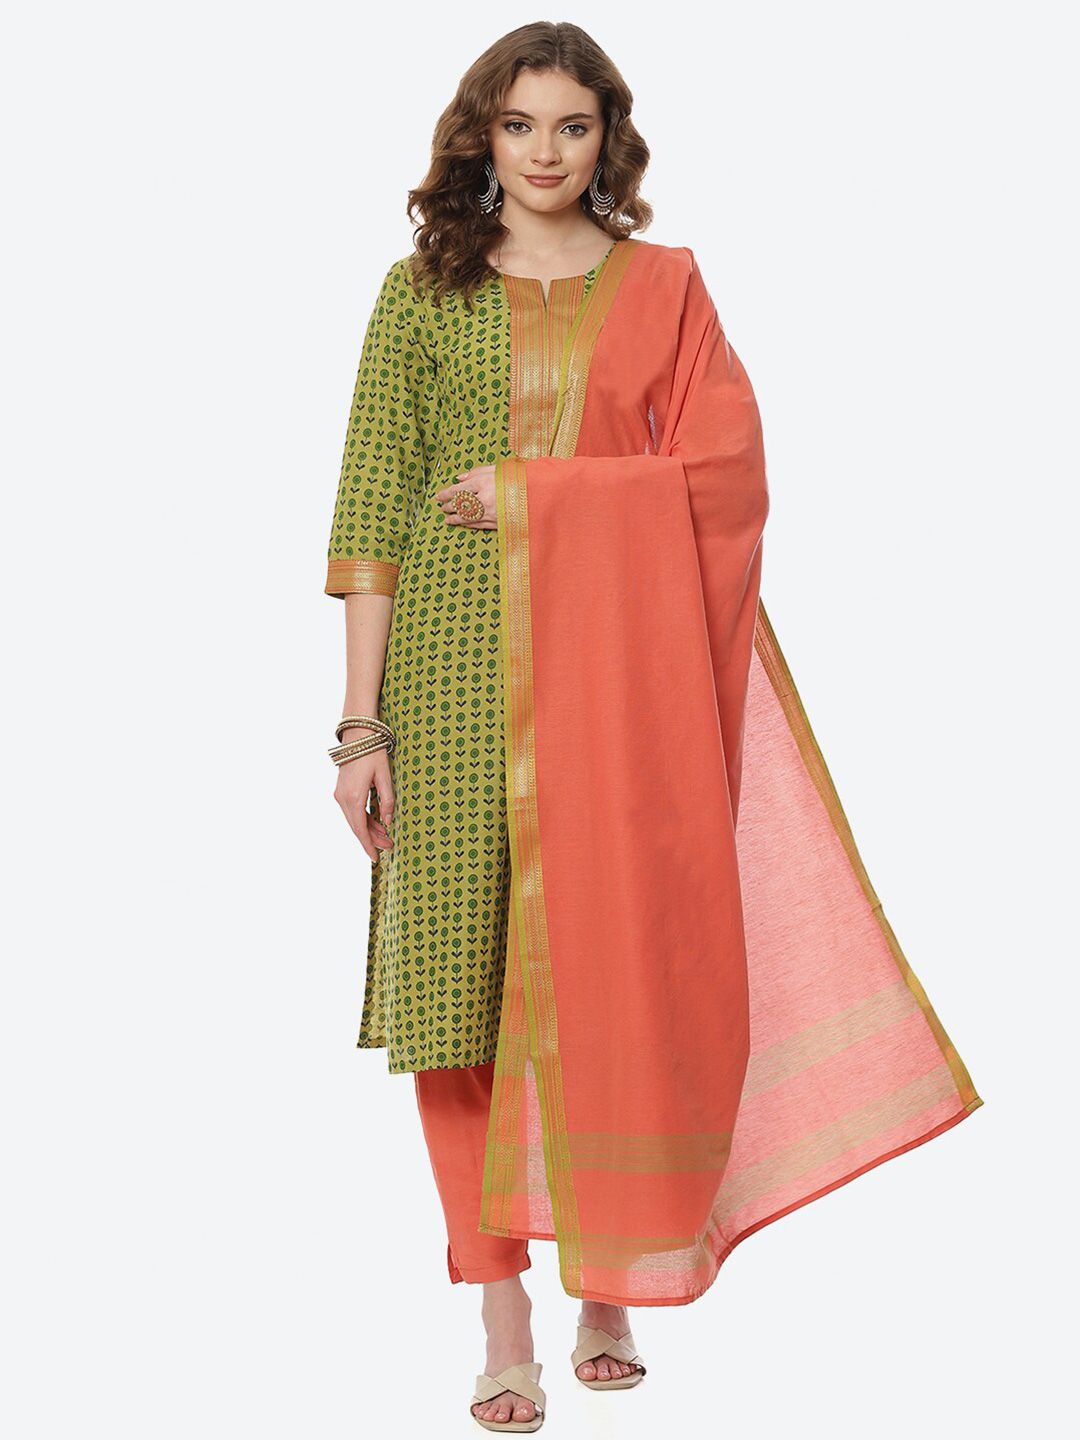 Biba Womens Green & Coral Printed Unstitched Dress Material Price in India